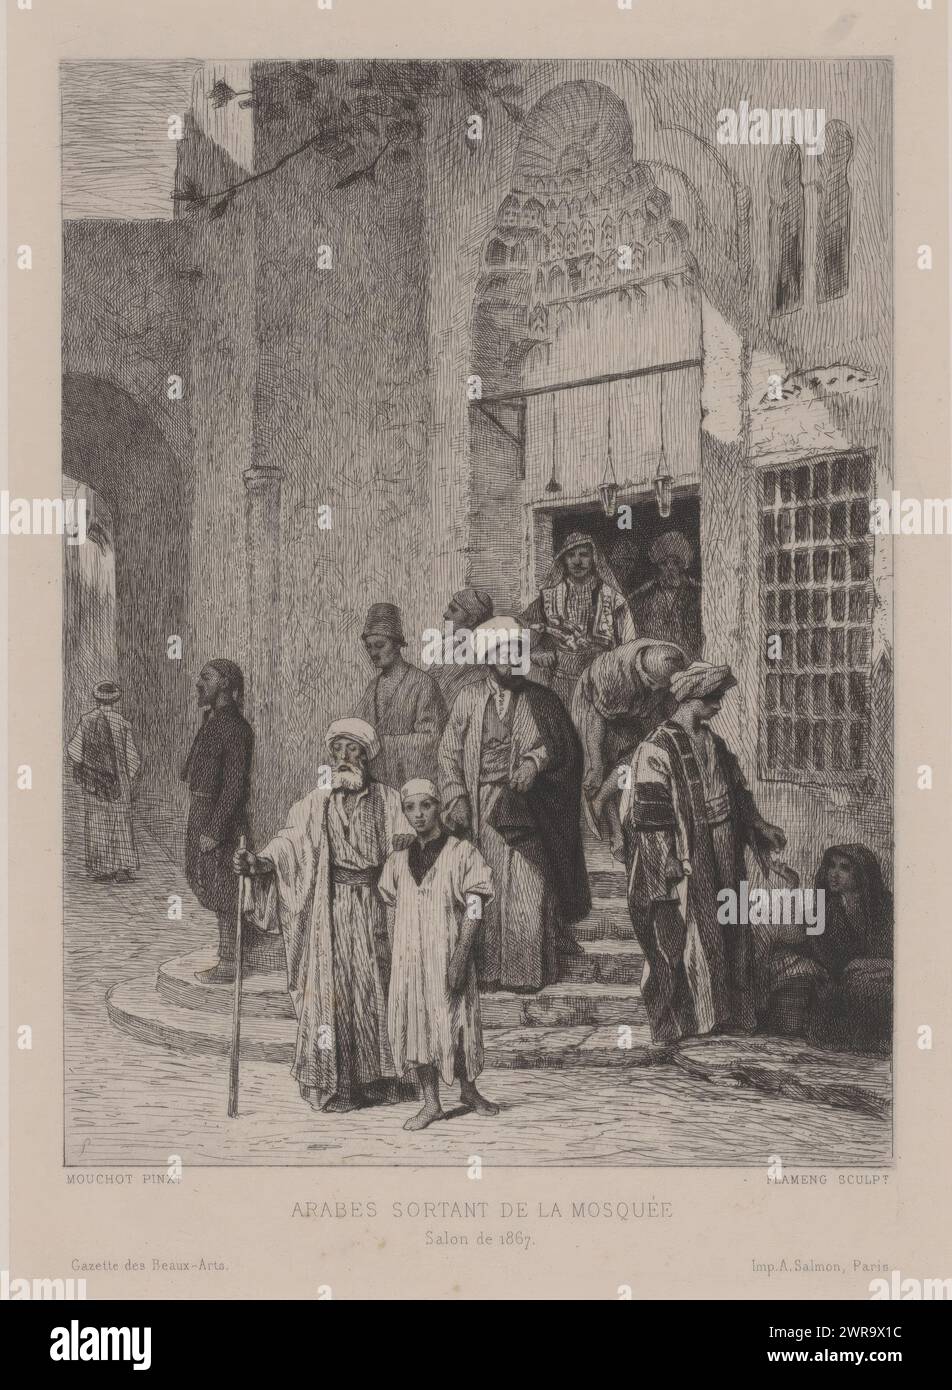 Muslims leaving the mosque, Arabes sortant de la mosquée (title on object), print maker: Léopold Flameng, after painting by: Mouchot, printer: Alfred Salmon, Paris, 1867, paper, etching, height 228 mm × width 171 mm, print Stock Photo